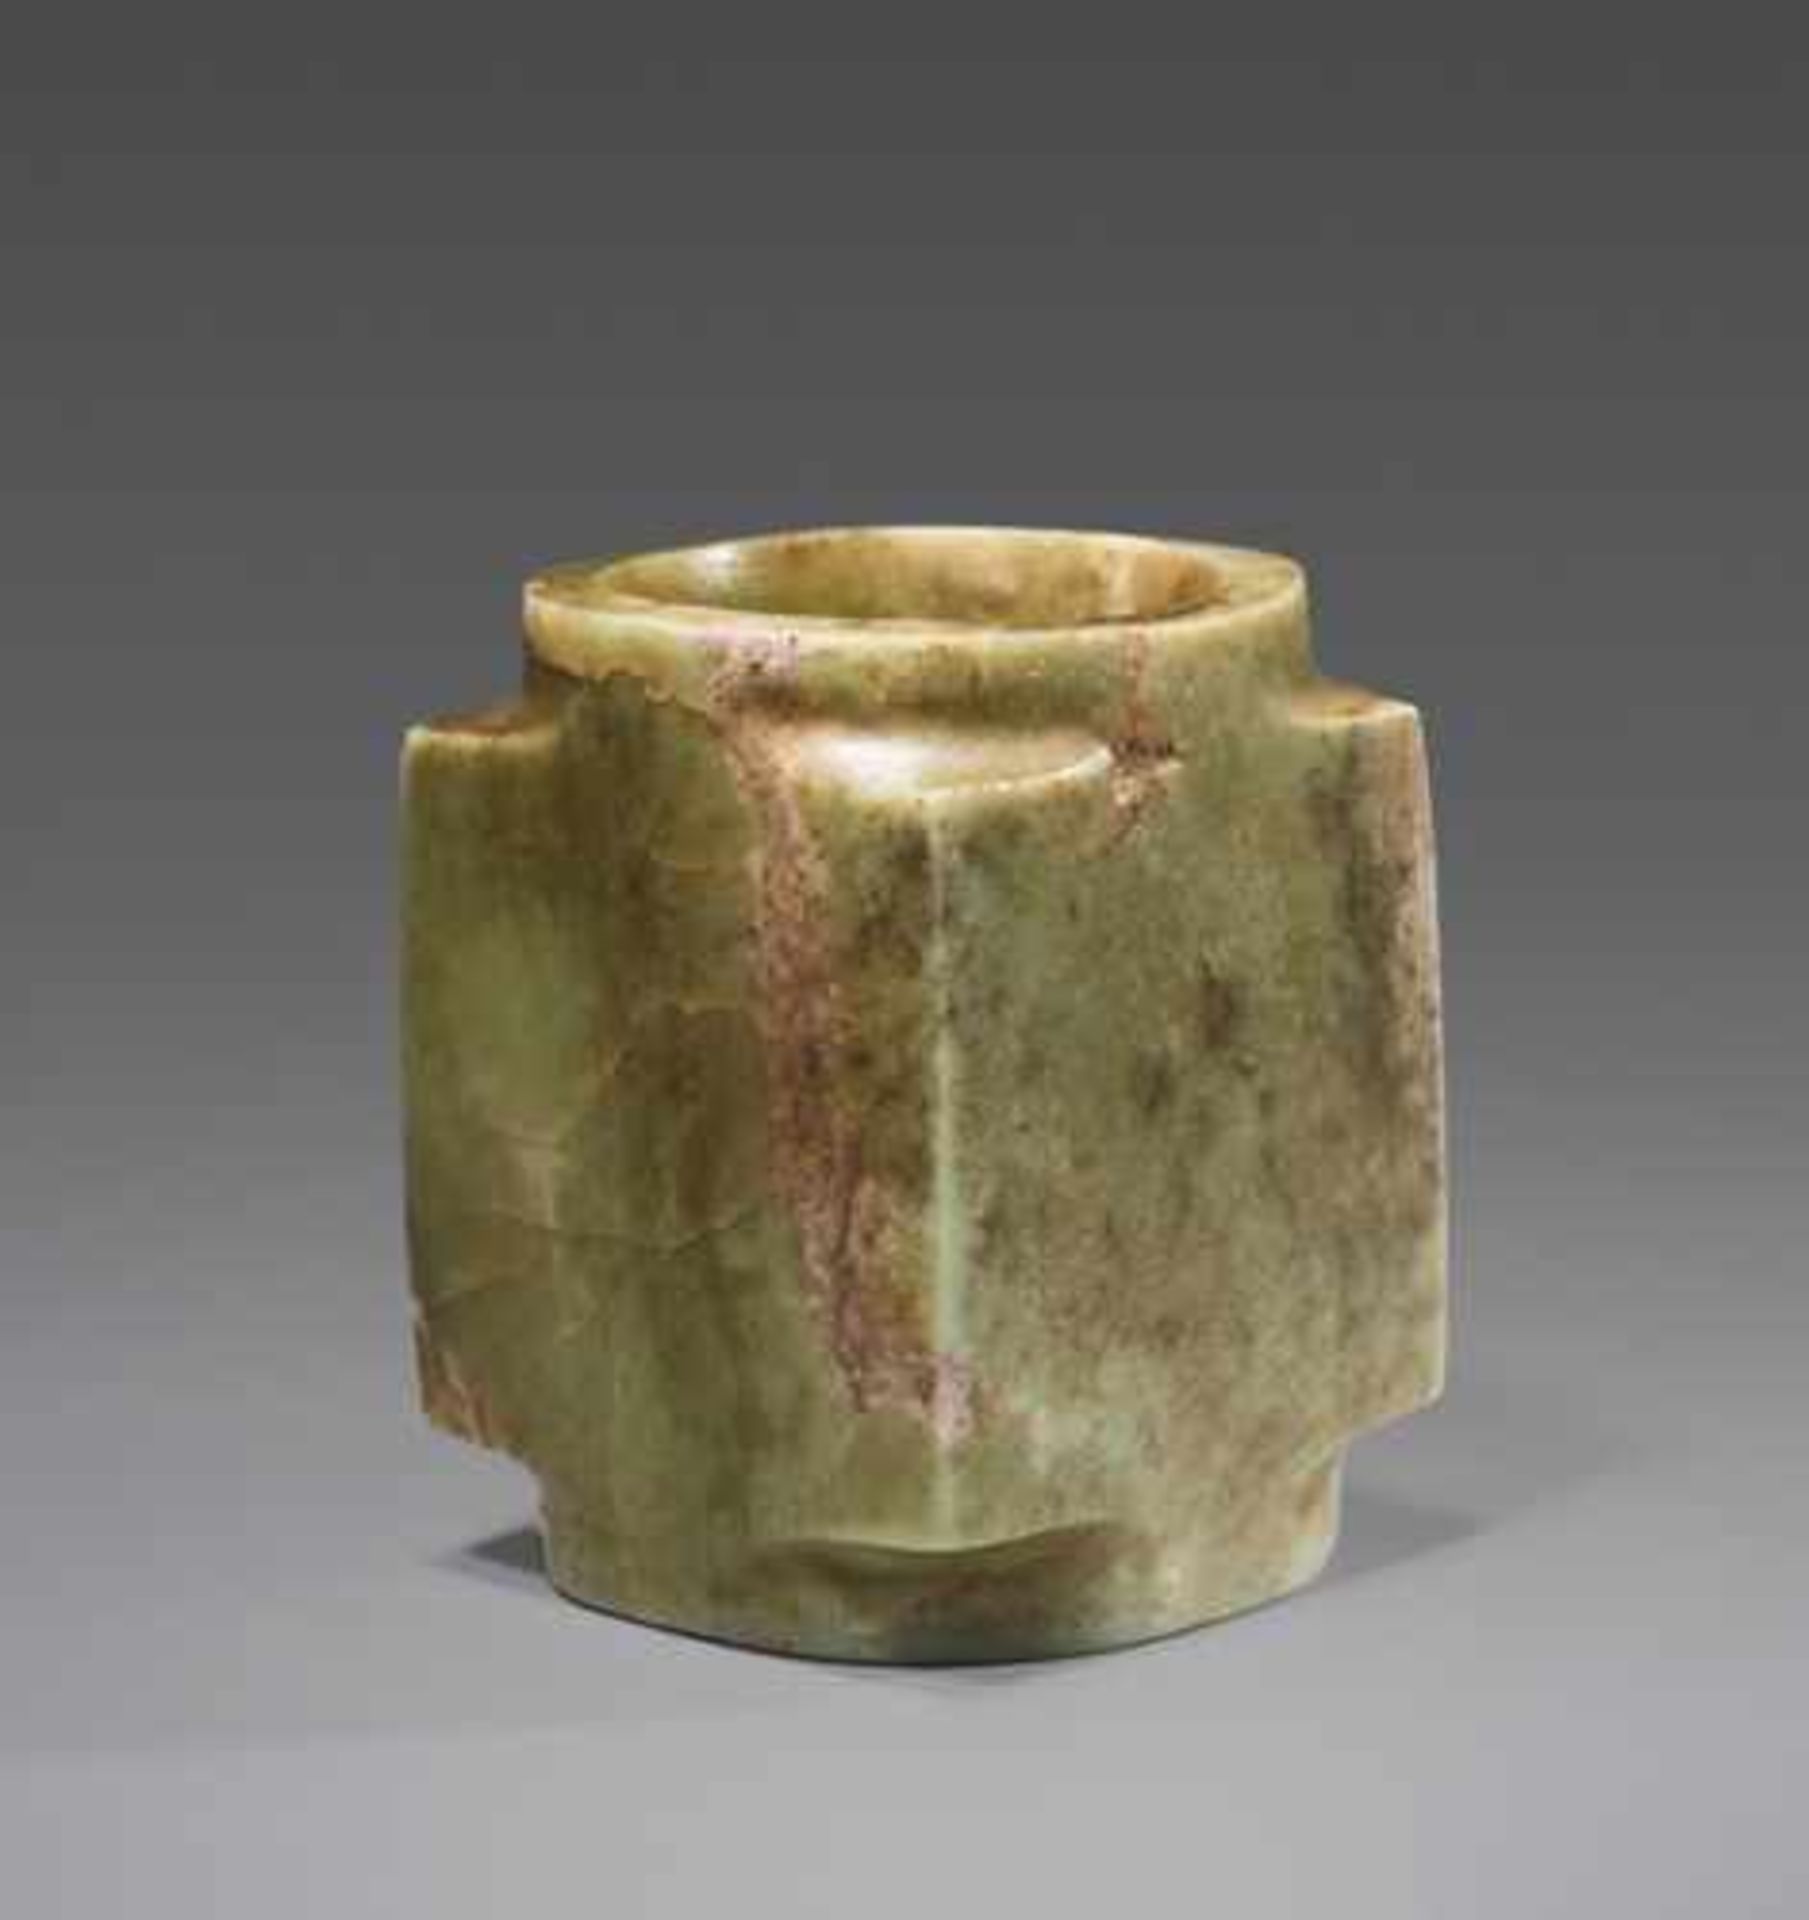 AN ELEGANT, PLAIN CONG IN HIGHLY POLISHED, LIGHT GREEN JADE Jade, China. Early Bronze Age, Qijia - Image 4 of 6